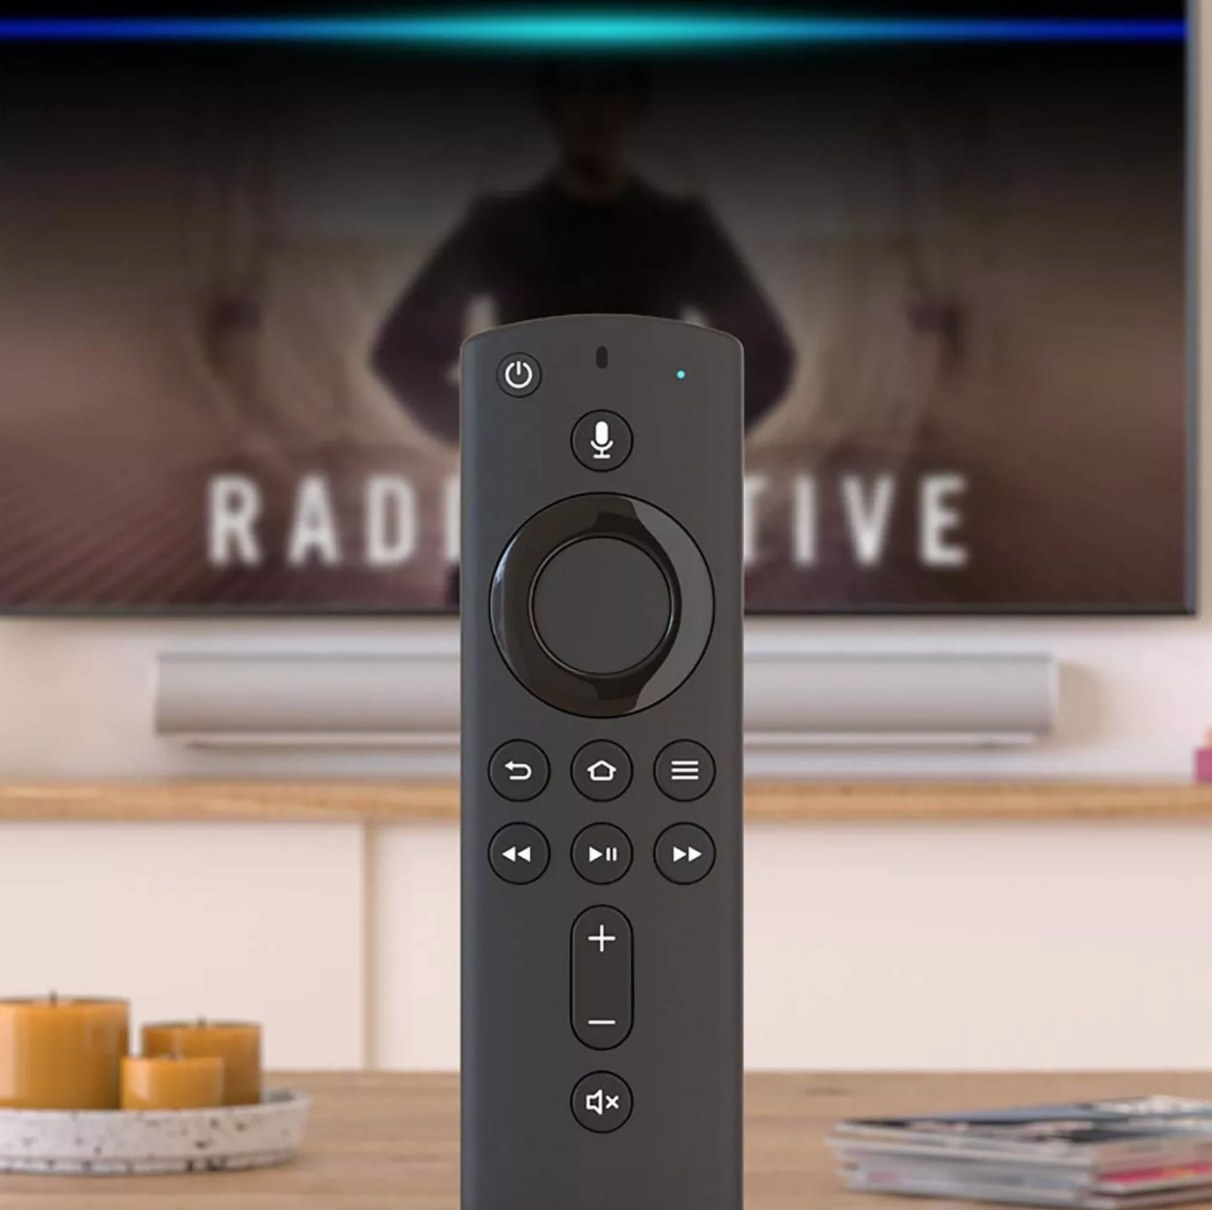 The Amazon Fire TV Stick with Alexa voice remote in front of a TV